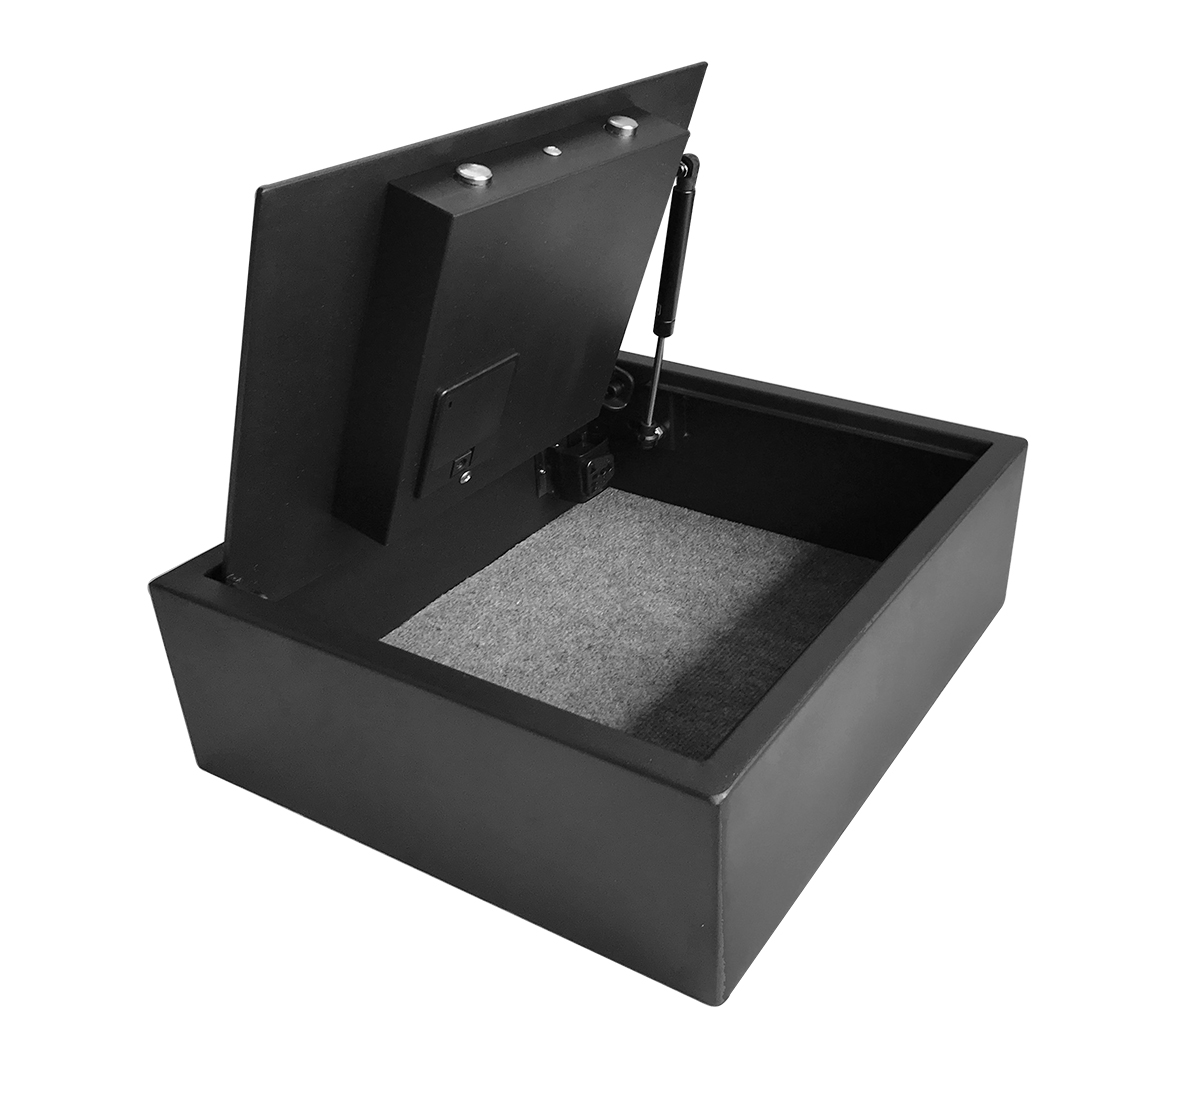 Black electric safe with top open 